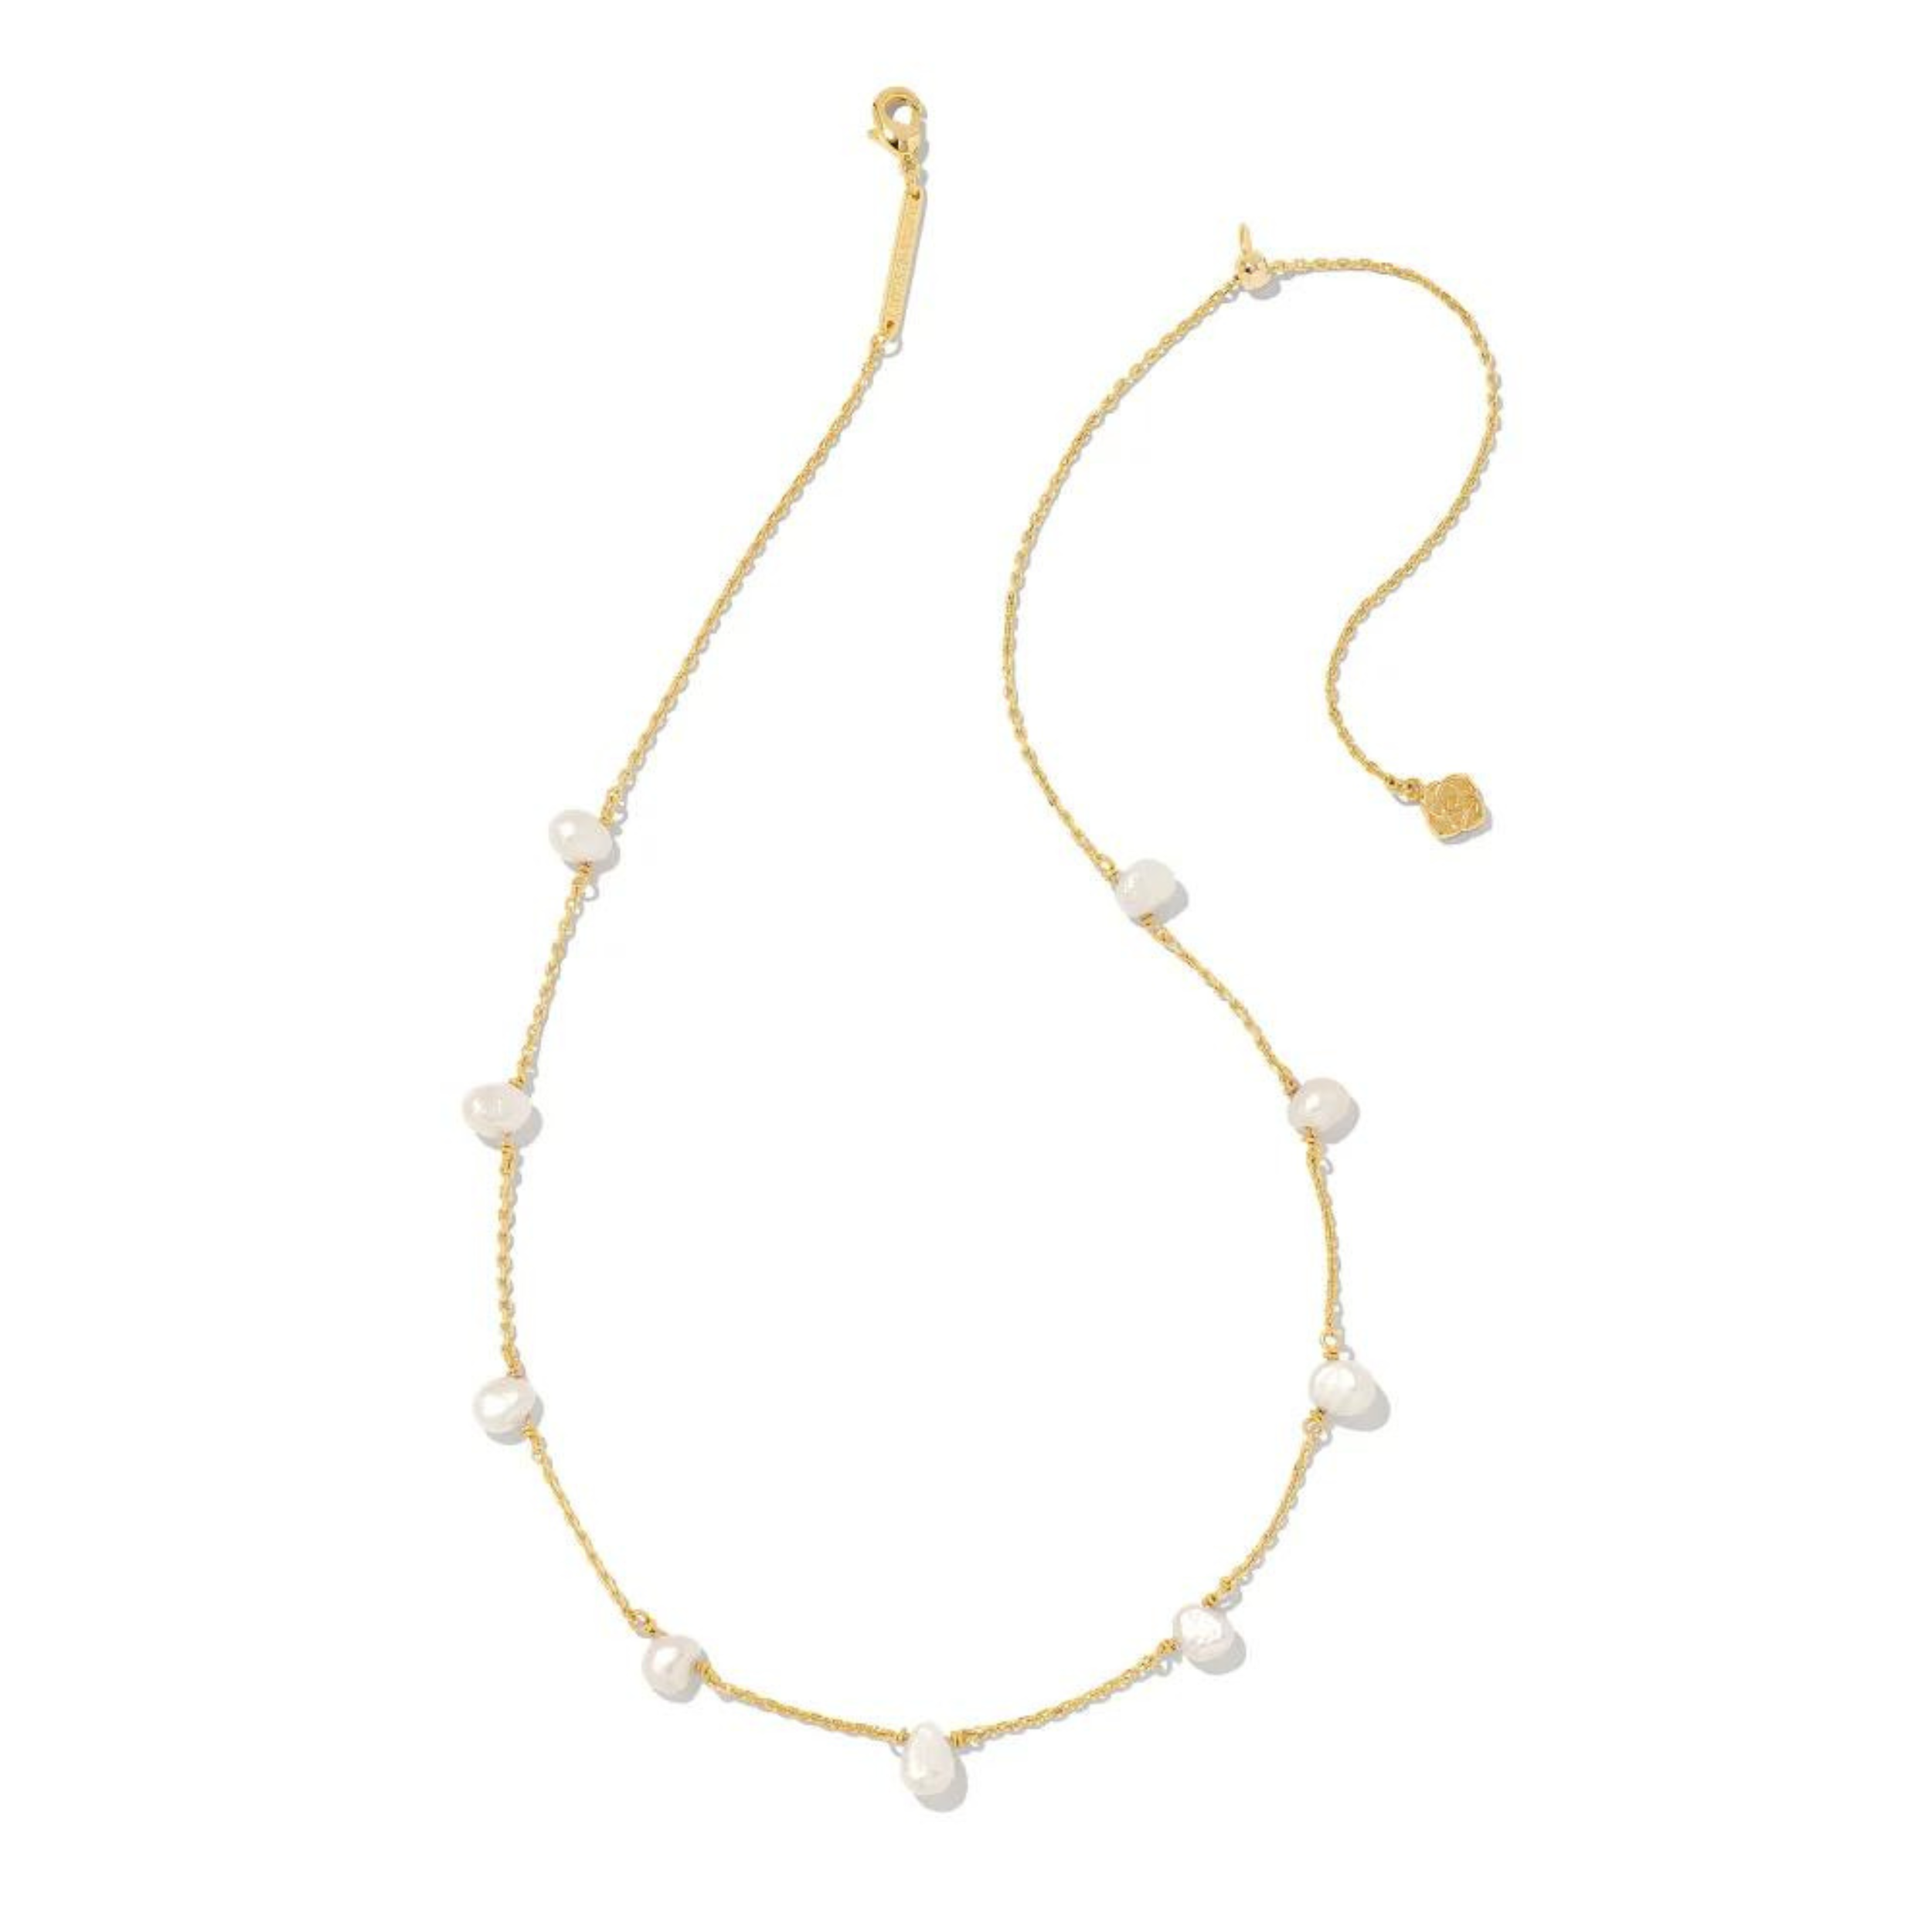 Kendra Scott | Leighton Gold Pearl Strand Necklace in White Pearl - Giddy Up Glamour Boutique